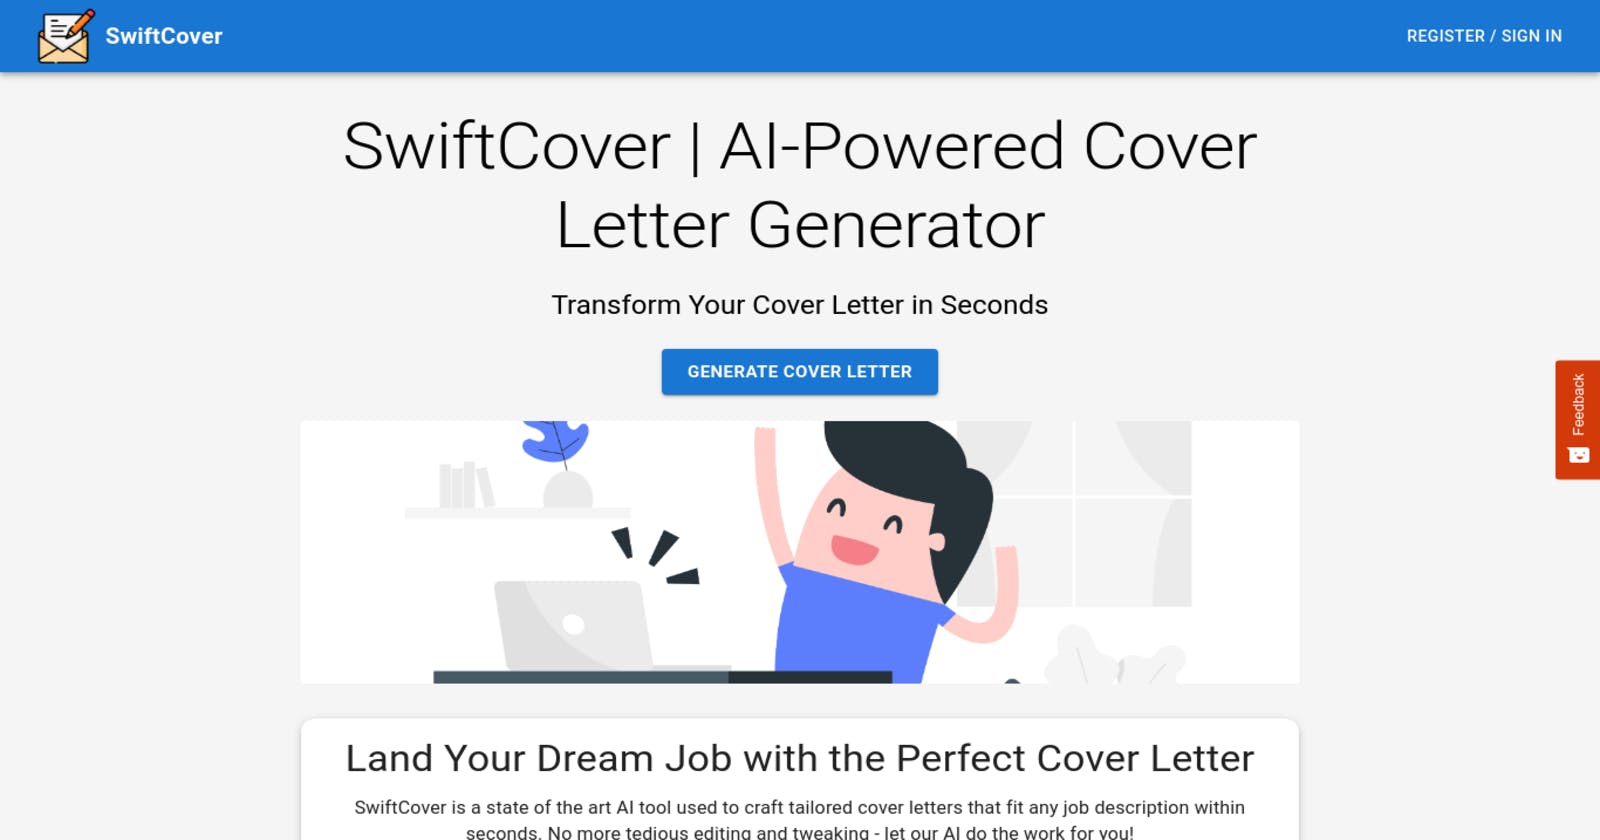 SwiftCover: Revolutionizing Job Applications with AI-Powered Cover Letters